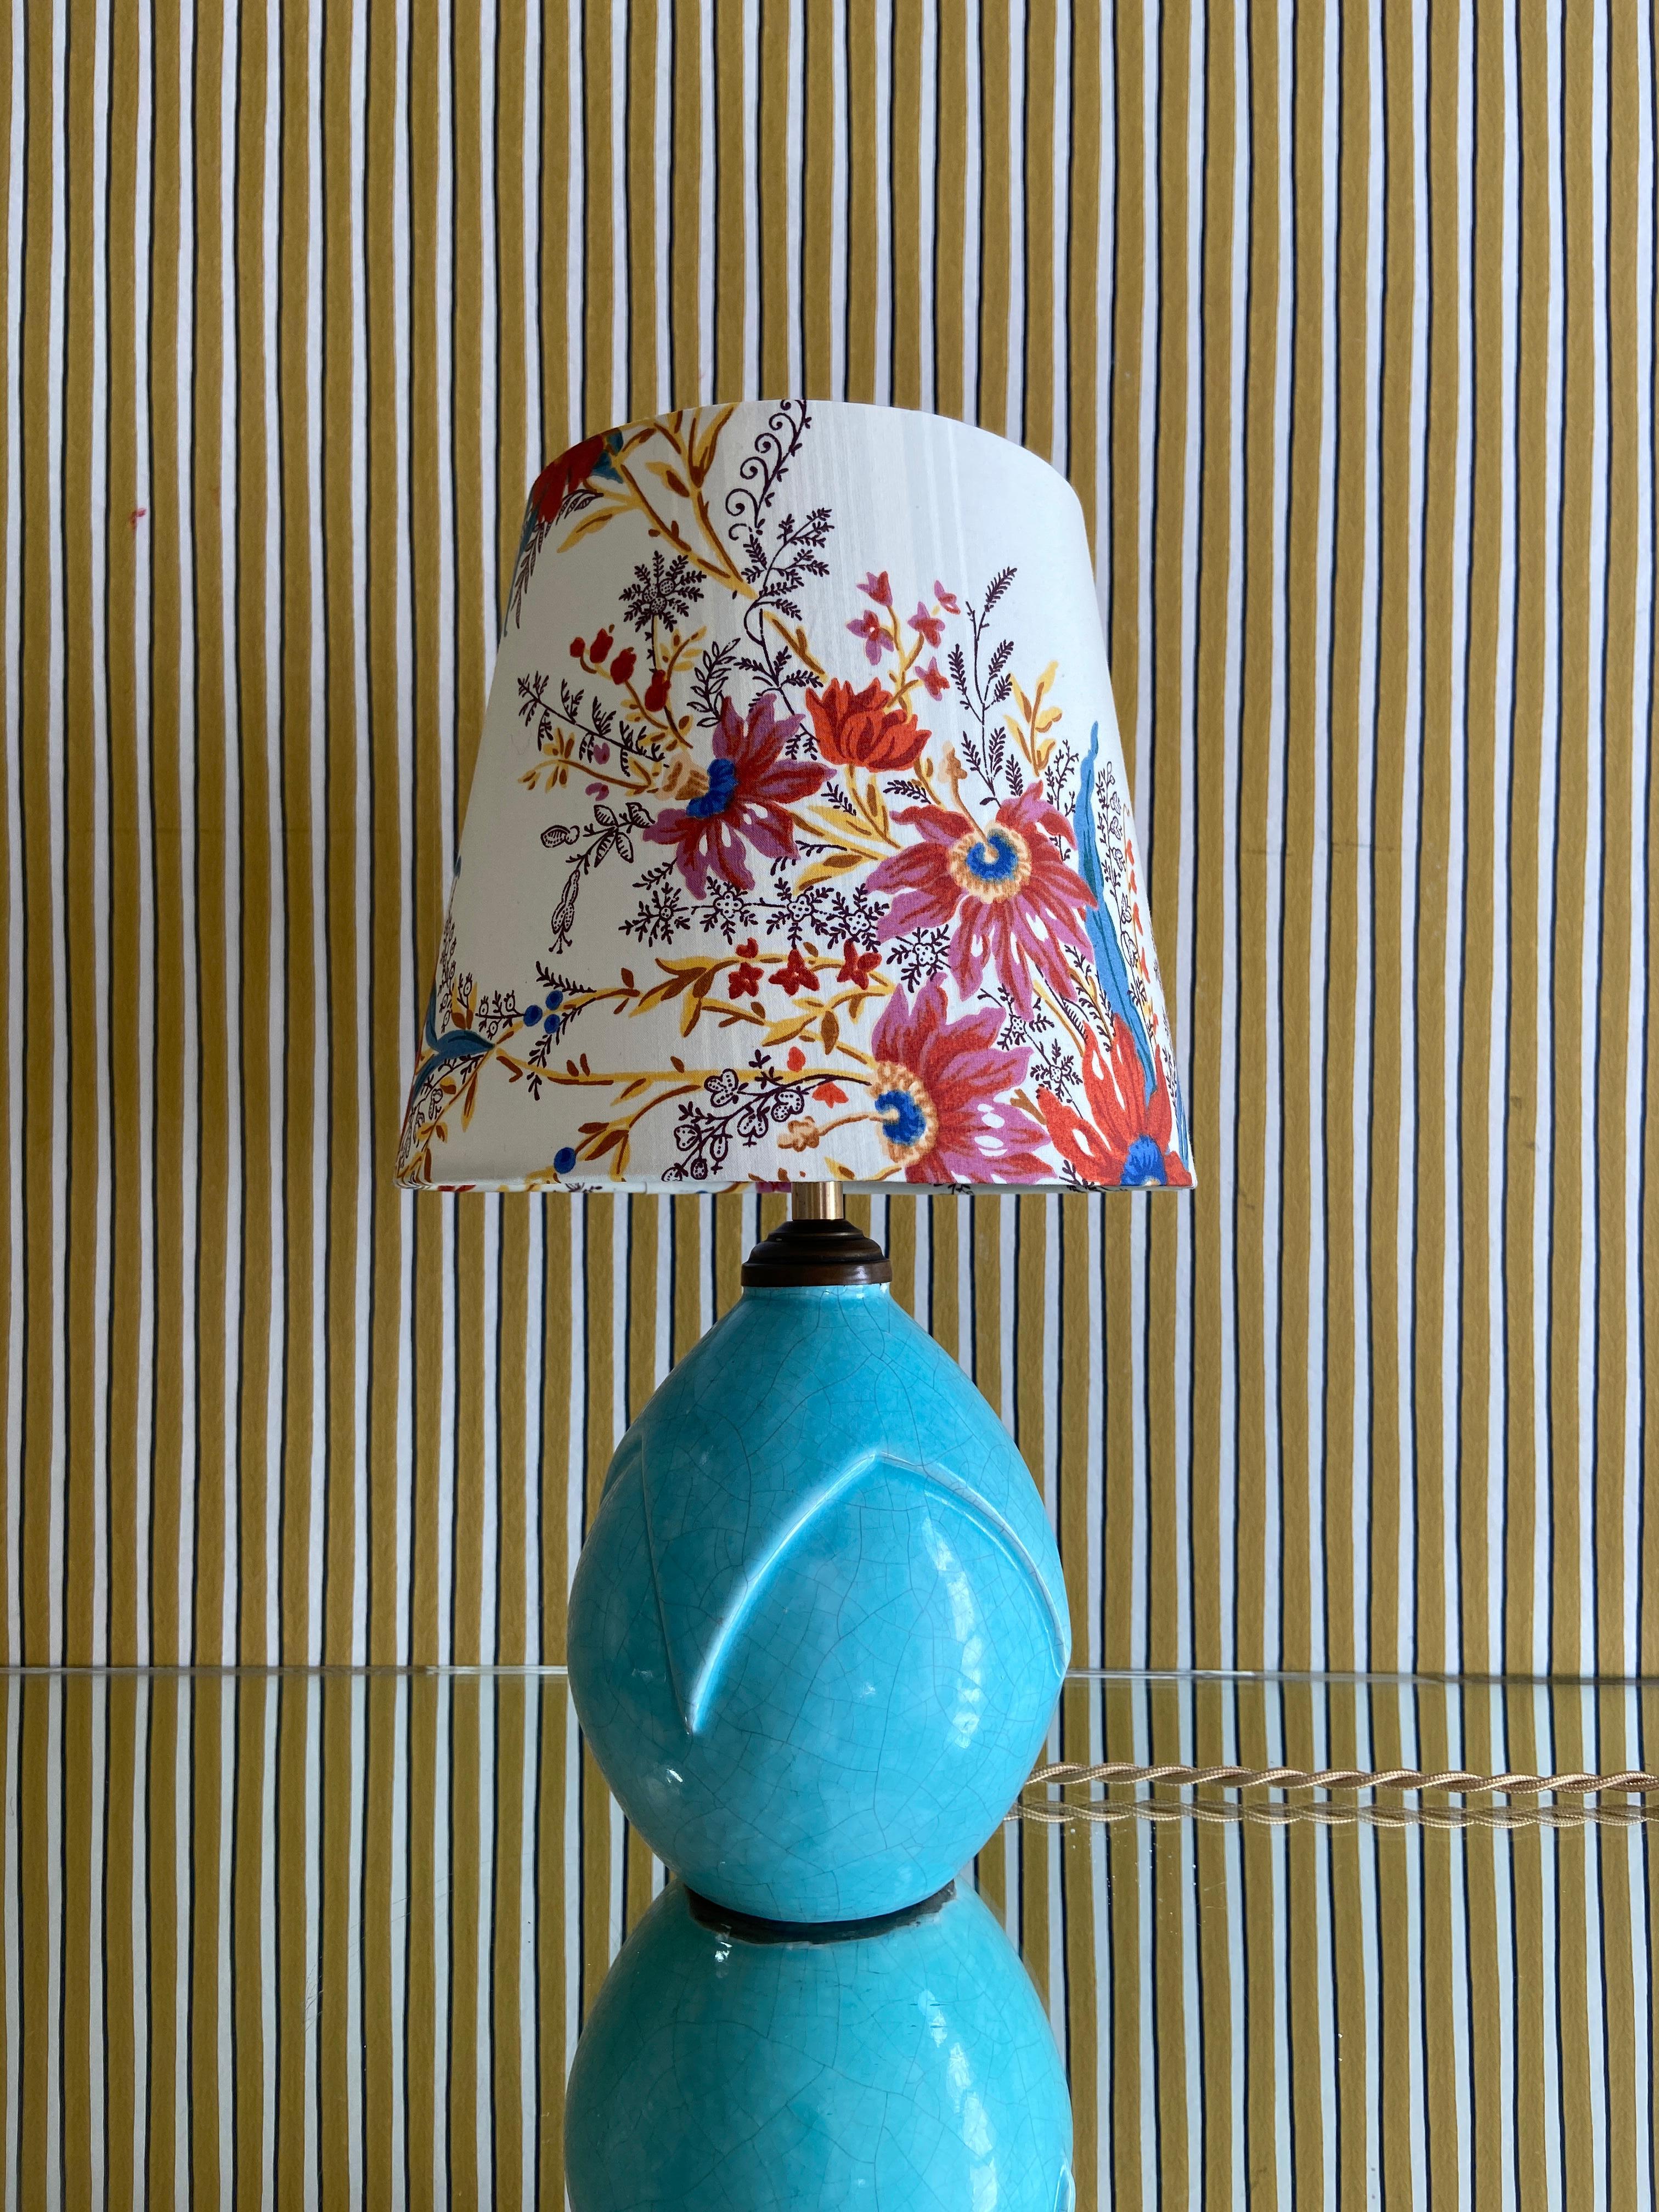 French Vintage Ceramic Table Lamp in Turquoise Glaze and Customized Shade, France